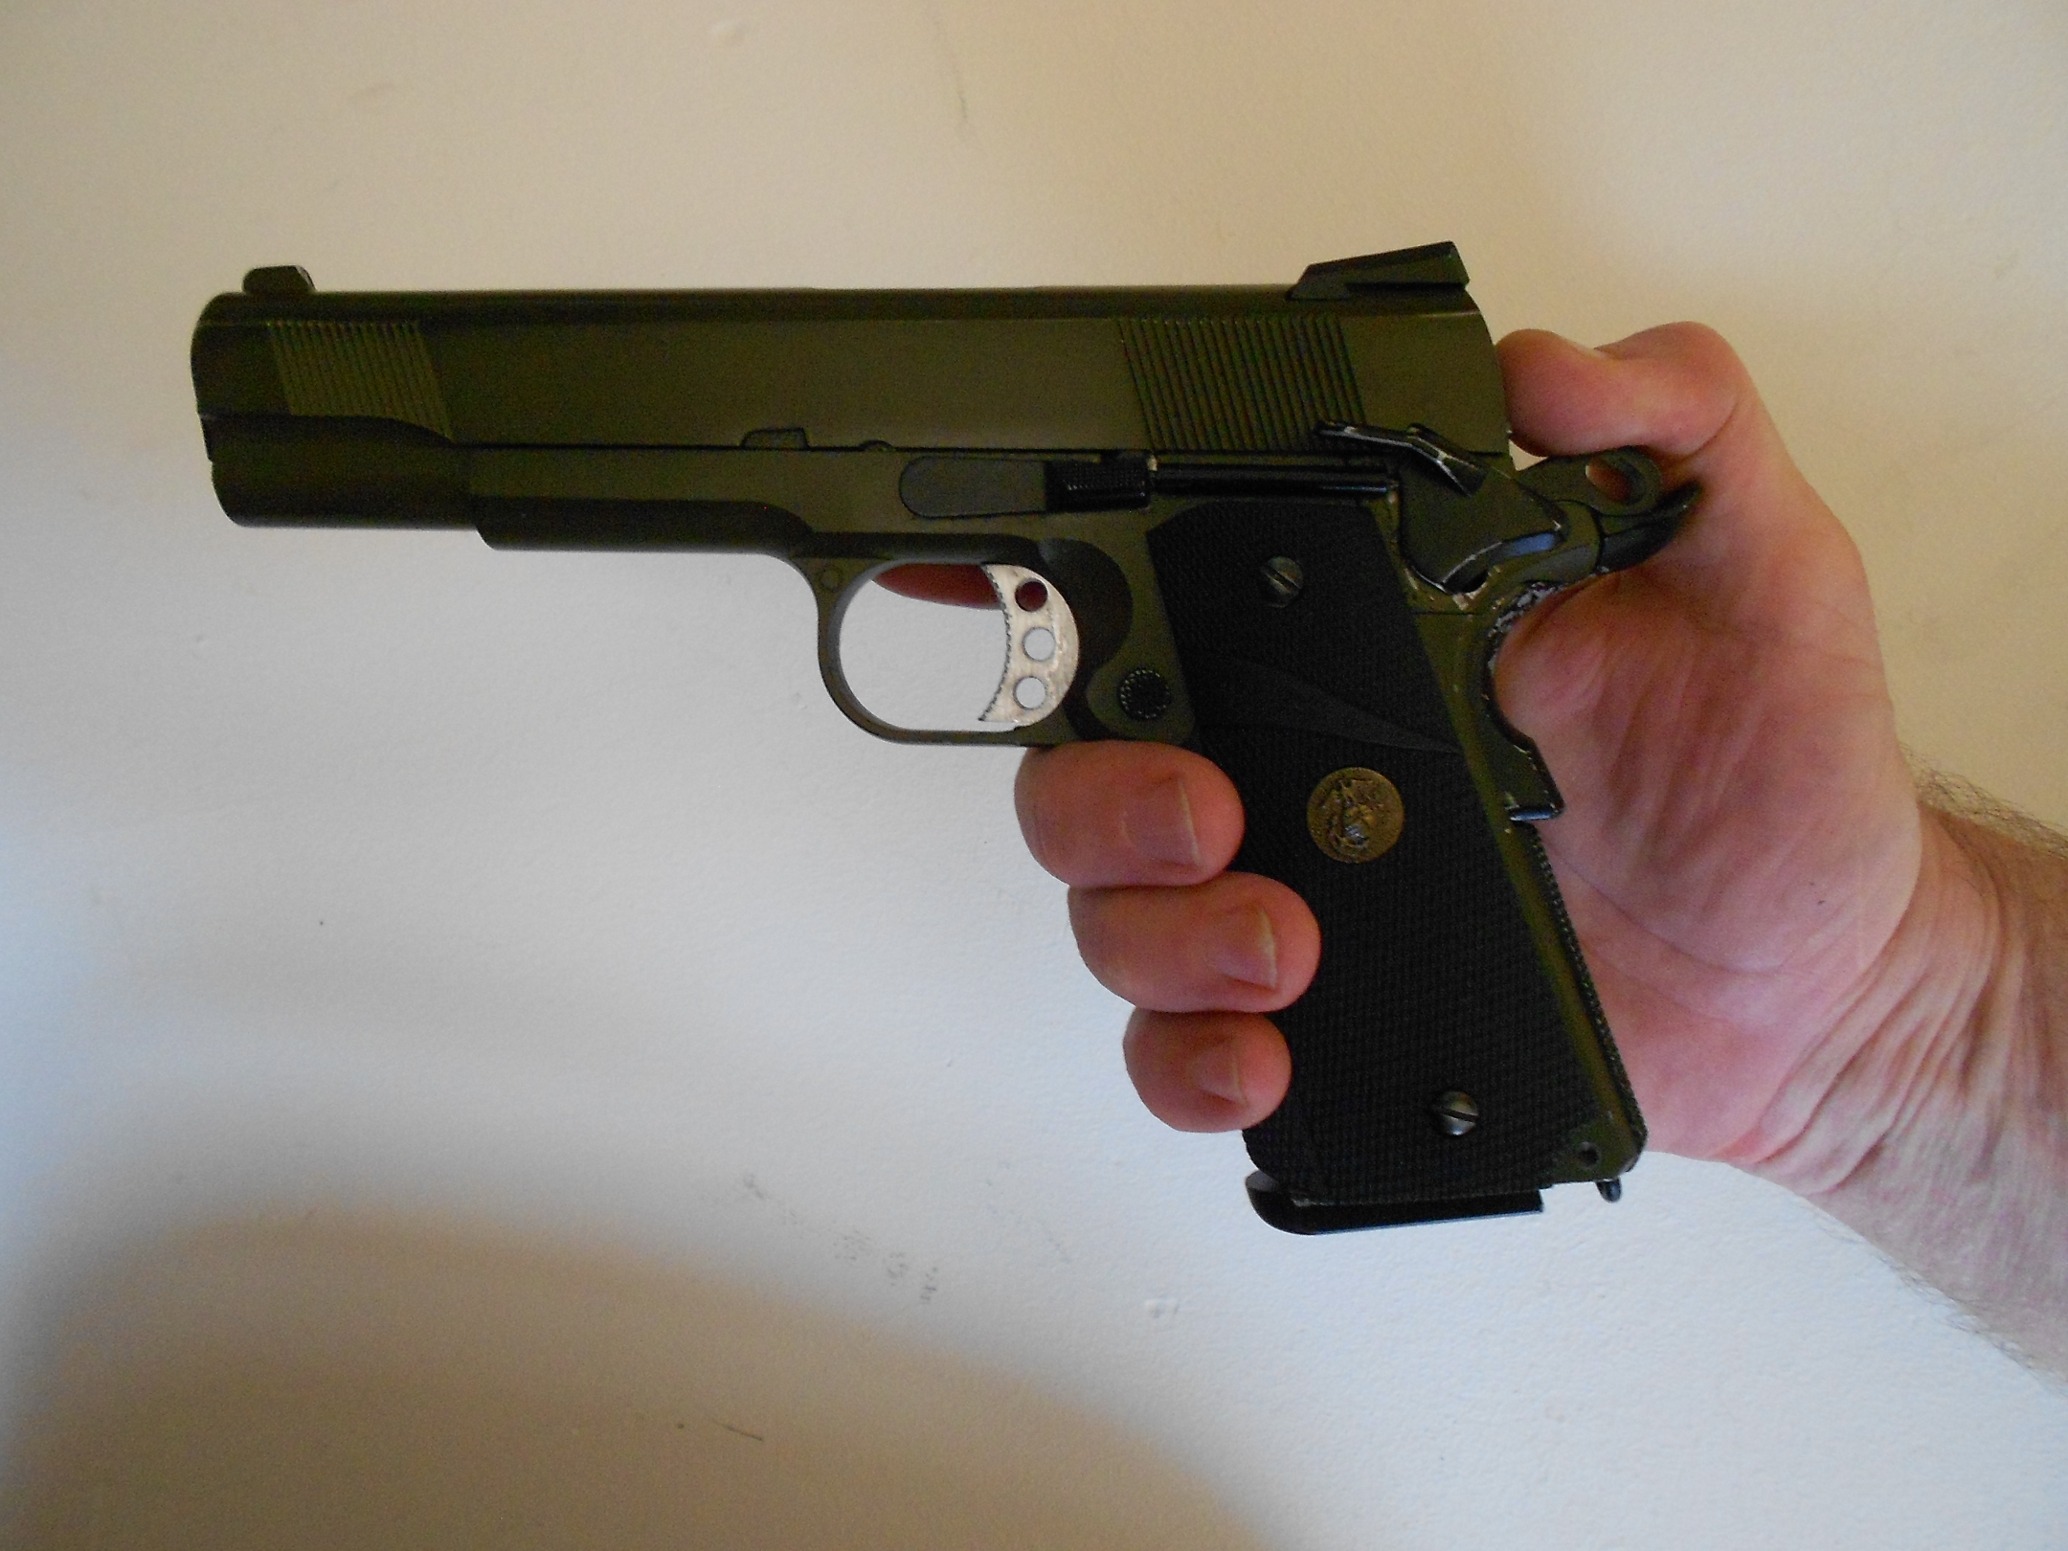 Correct hold ready to insert a 1911 pistol in Condition 1 "Cocked and Locked" into a holster. Finger out of the trigger guard, thumb on the hammer, safety catch on, grip safety not being depressed. The thumb is not removed from the hammer until the pistol is fully in the holster, the top break strap is secured and checked to be secured, and the safety catch has been checked to be still on. Condition 1 carry requires special vigilance.